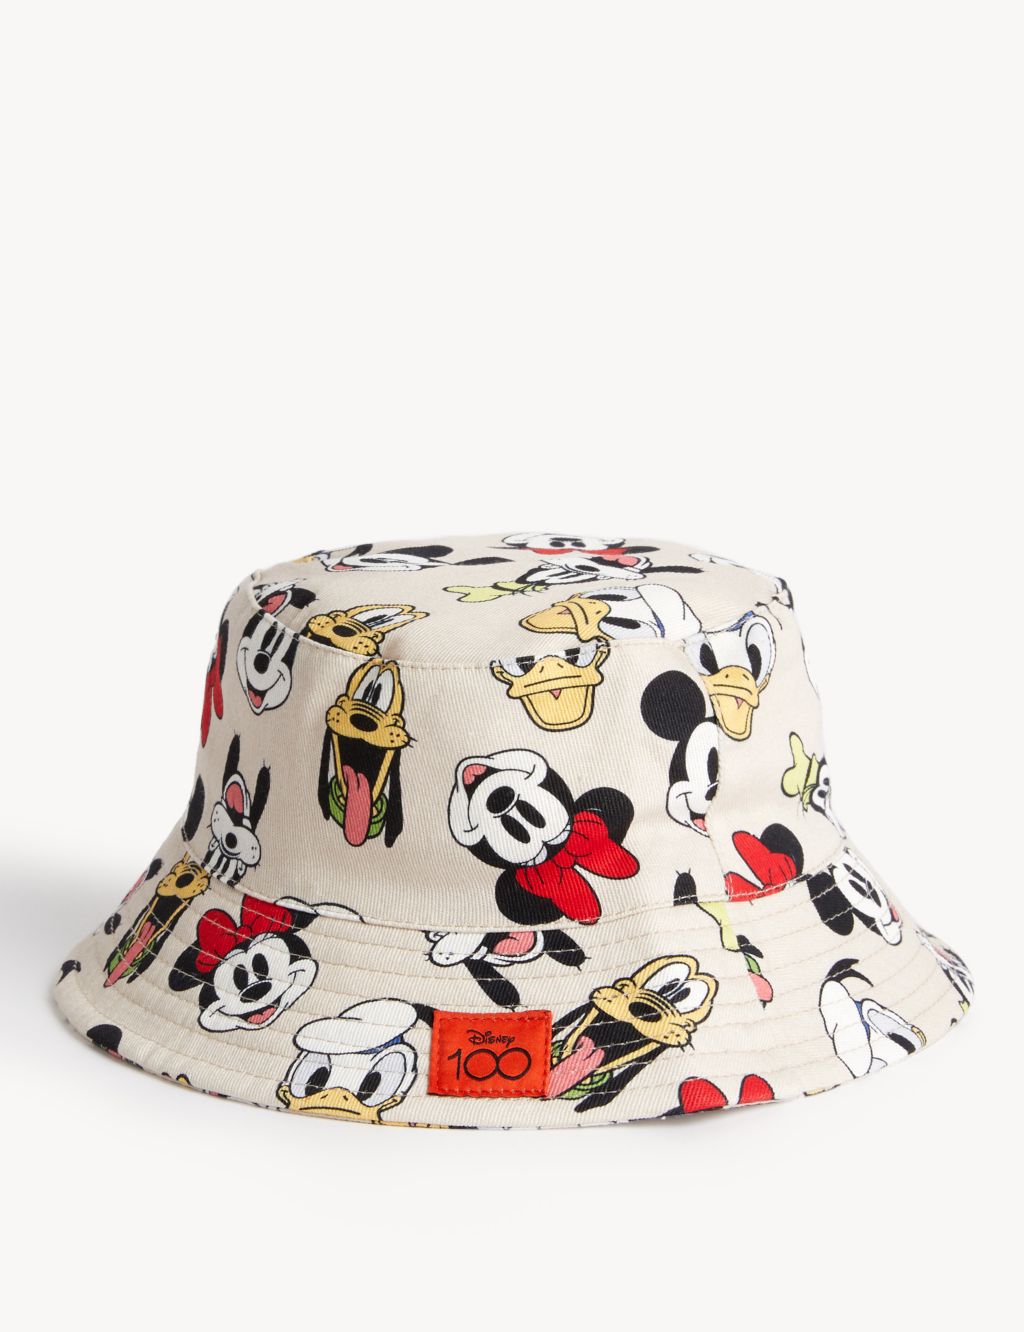 Kids' Pure Cotton Mickey Mouse™ Sun Hat (12 Mths - 6 Yrs) image 1